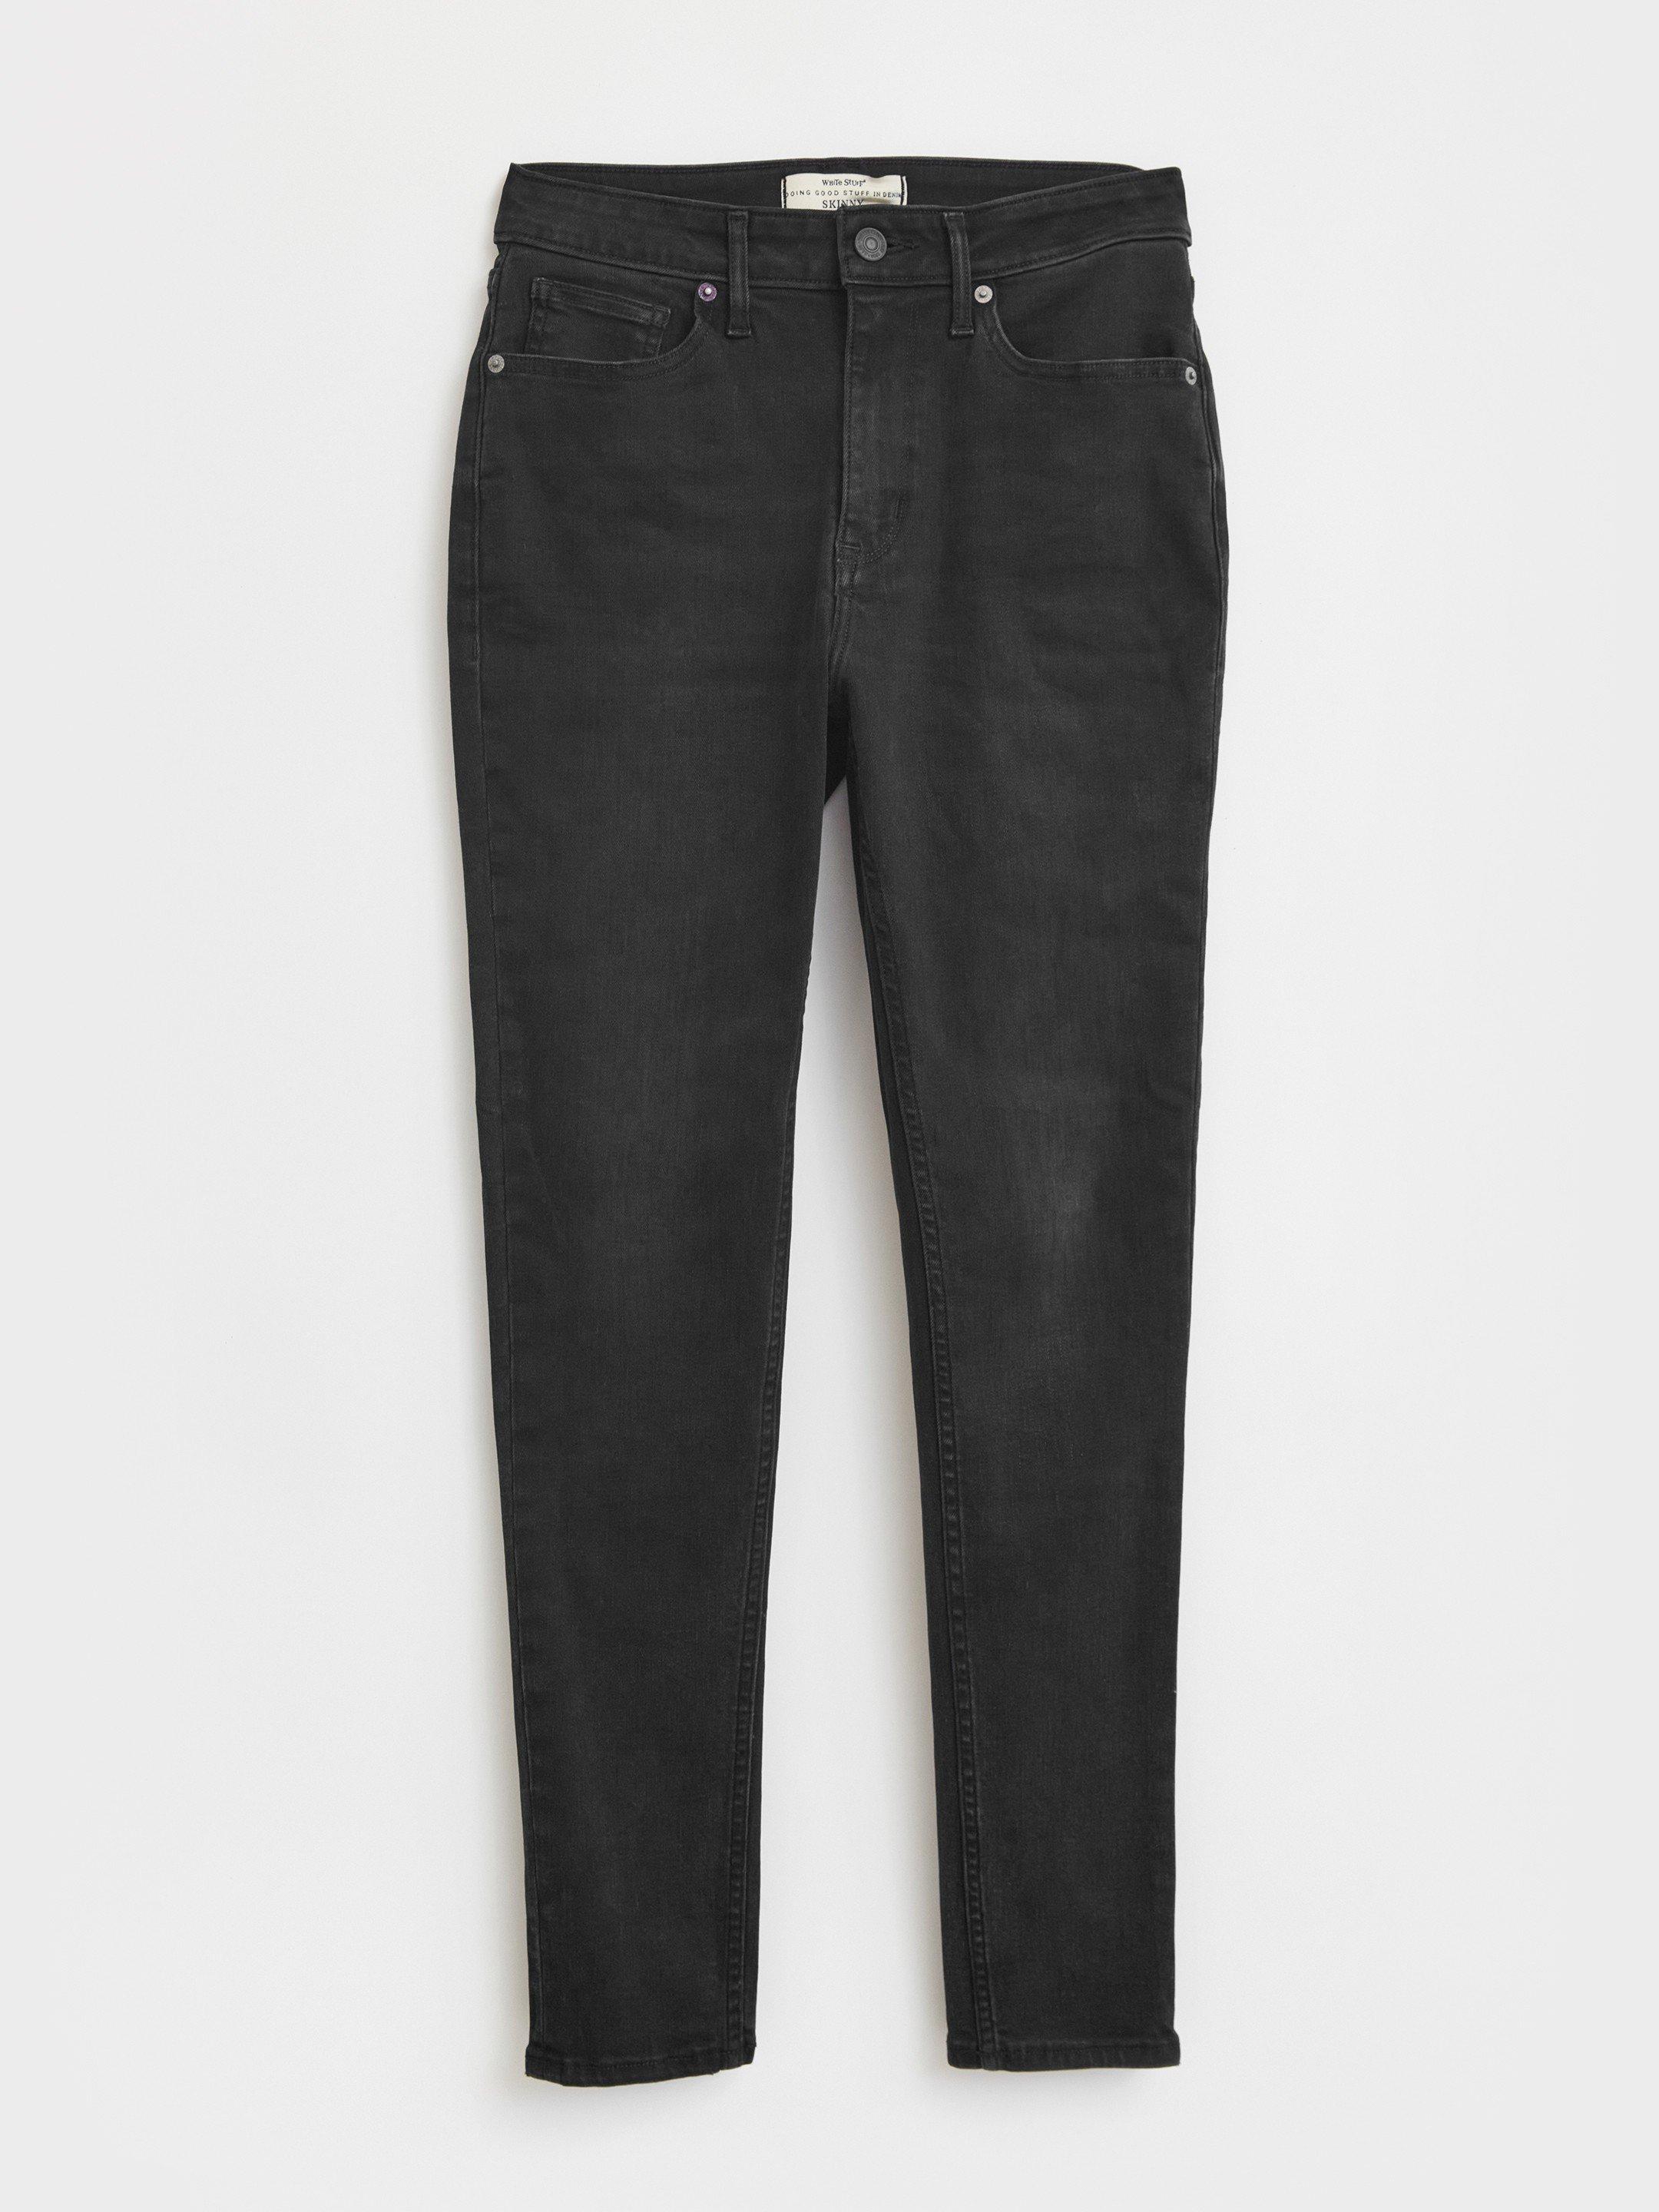 Amelia Mid Rise Skinny Jean in WASHED BLK - FLAT FRONT